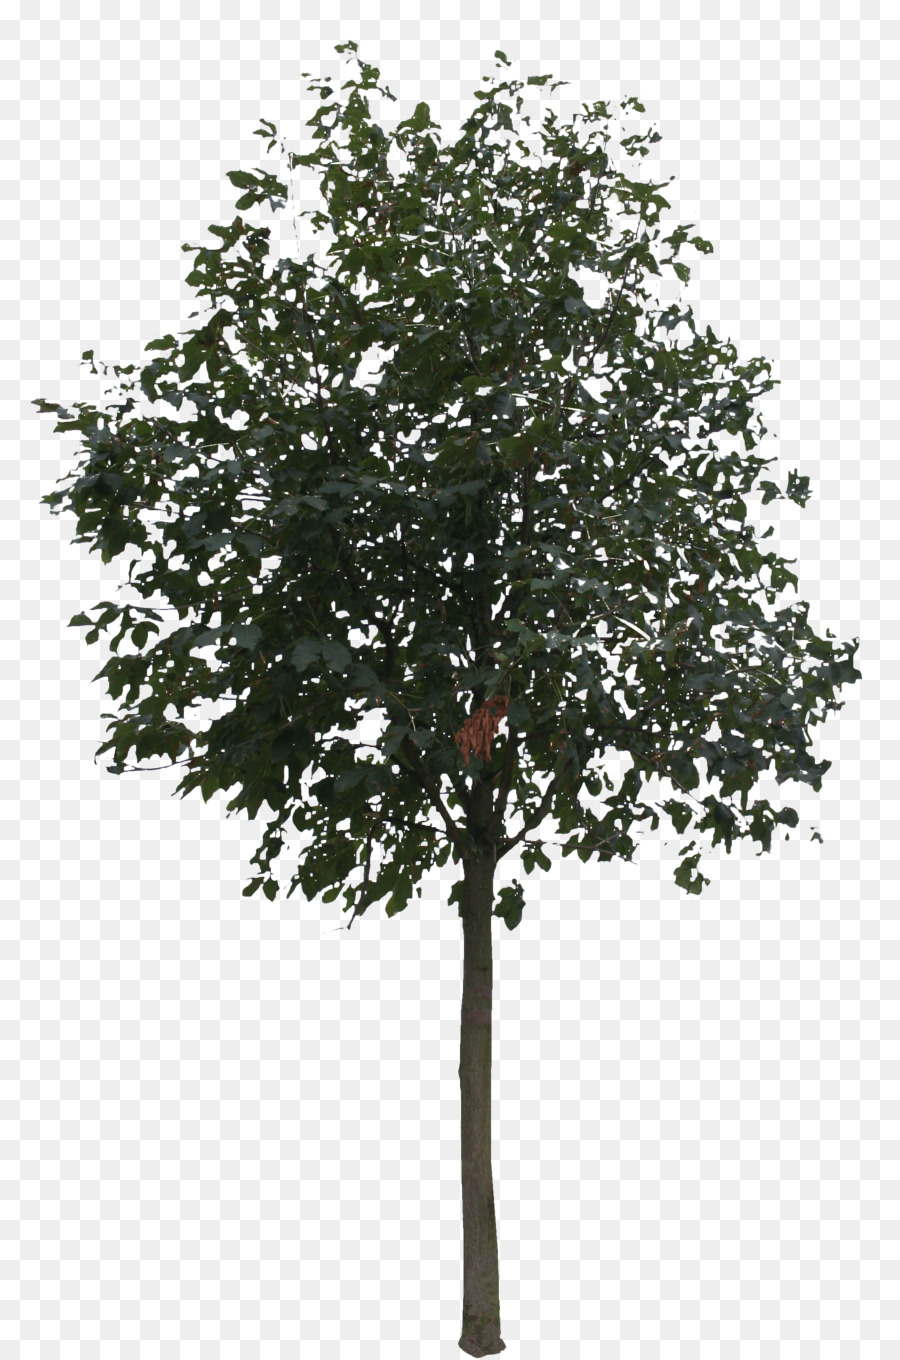 Tree Rendering - small trees png download - 1831*2765 - Free Transparent Tree png Download.